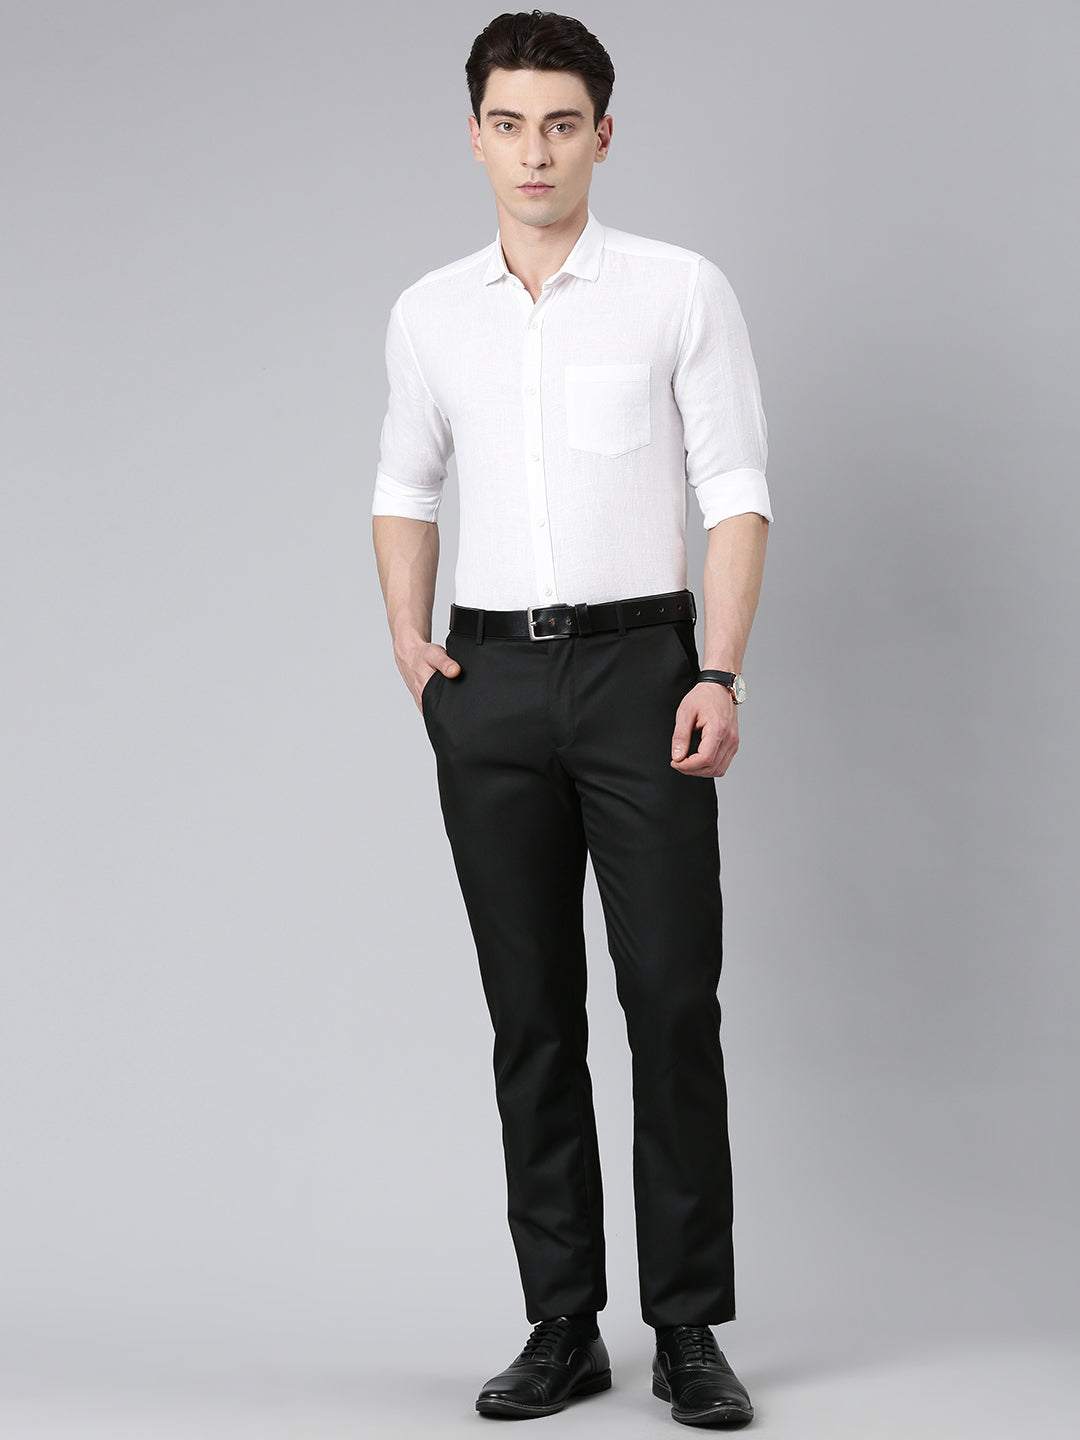 5thanfold Pure Linen Men Solid Formal White Slim Fit Full Sleev Spread Collar Shirt